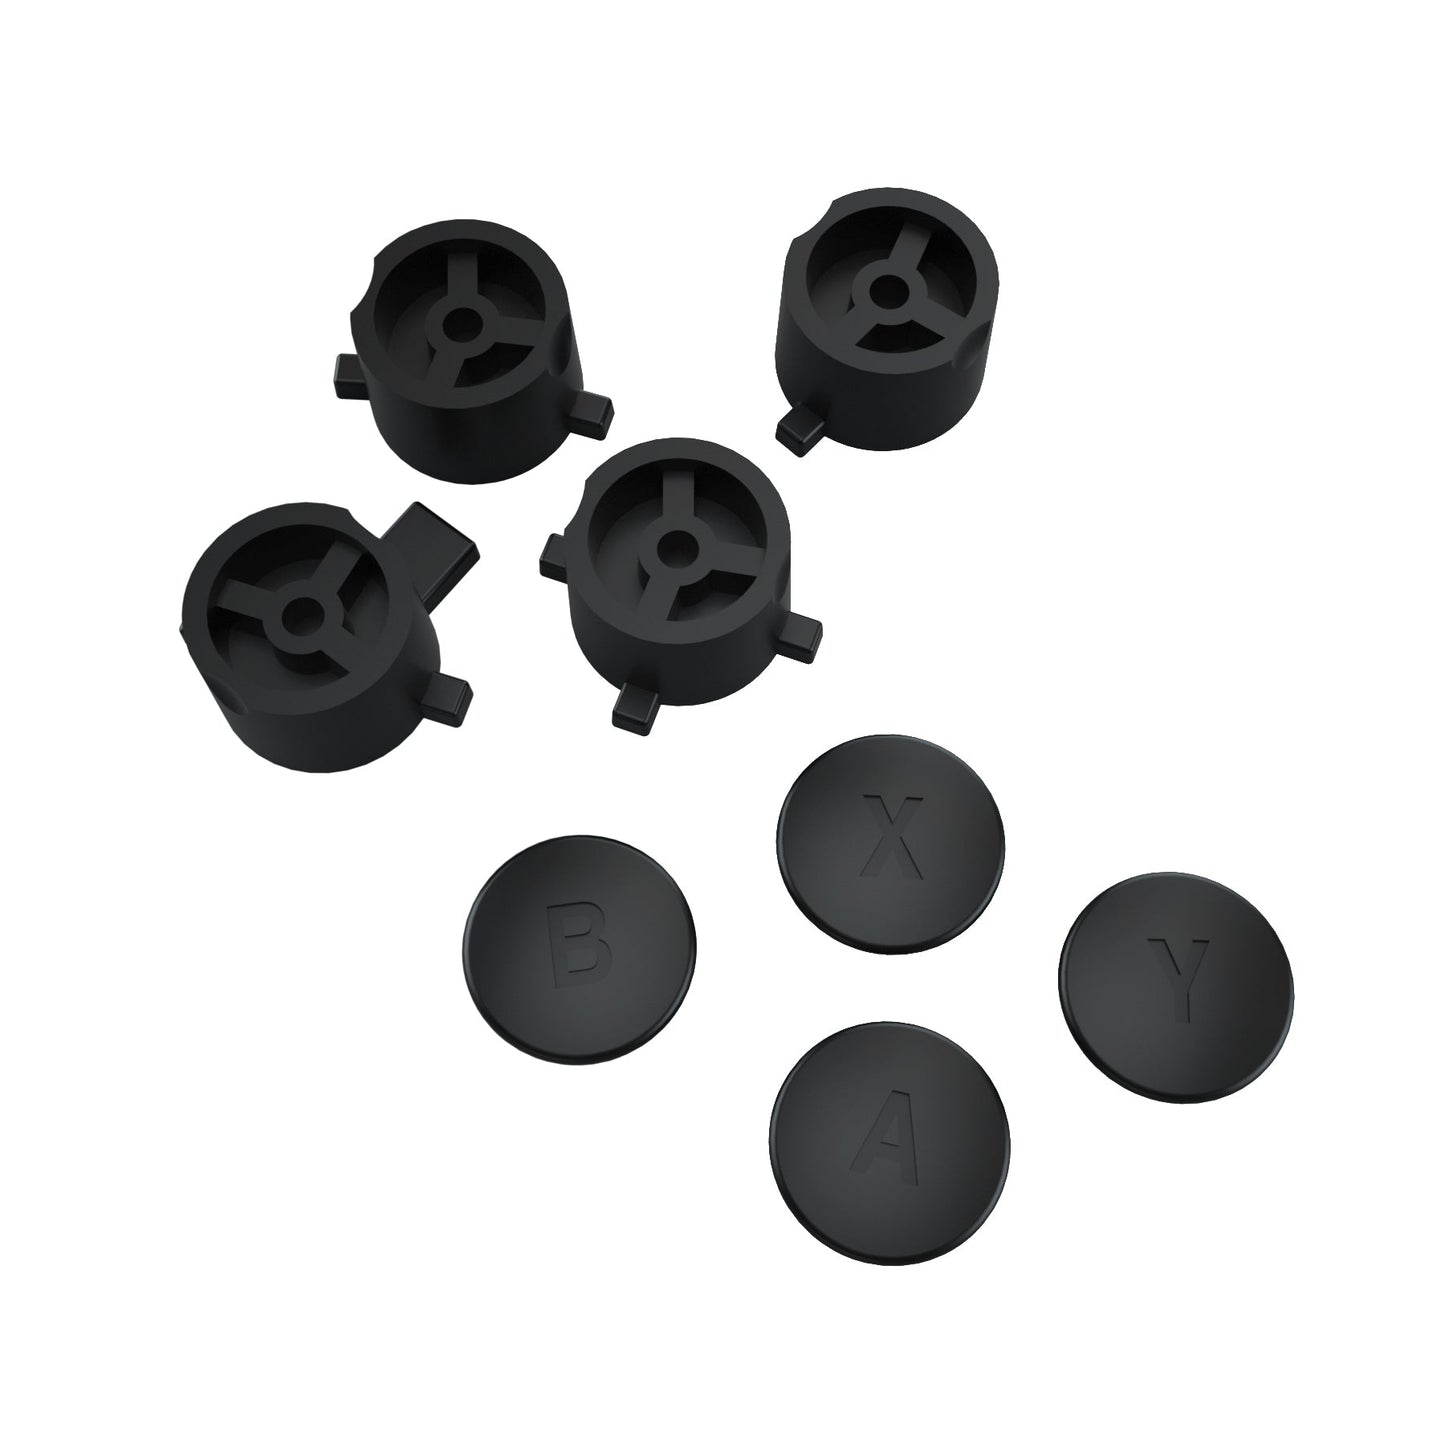 eXtremeRate Retail Black Interchangeable ABXY Buttons for Nintendo Switch Pro Controller, DIY Swappable Replacement ABXY for NS Pro Controller- Controller NOT Included - KRH604